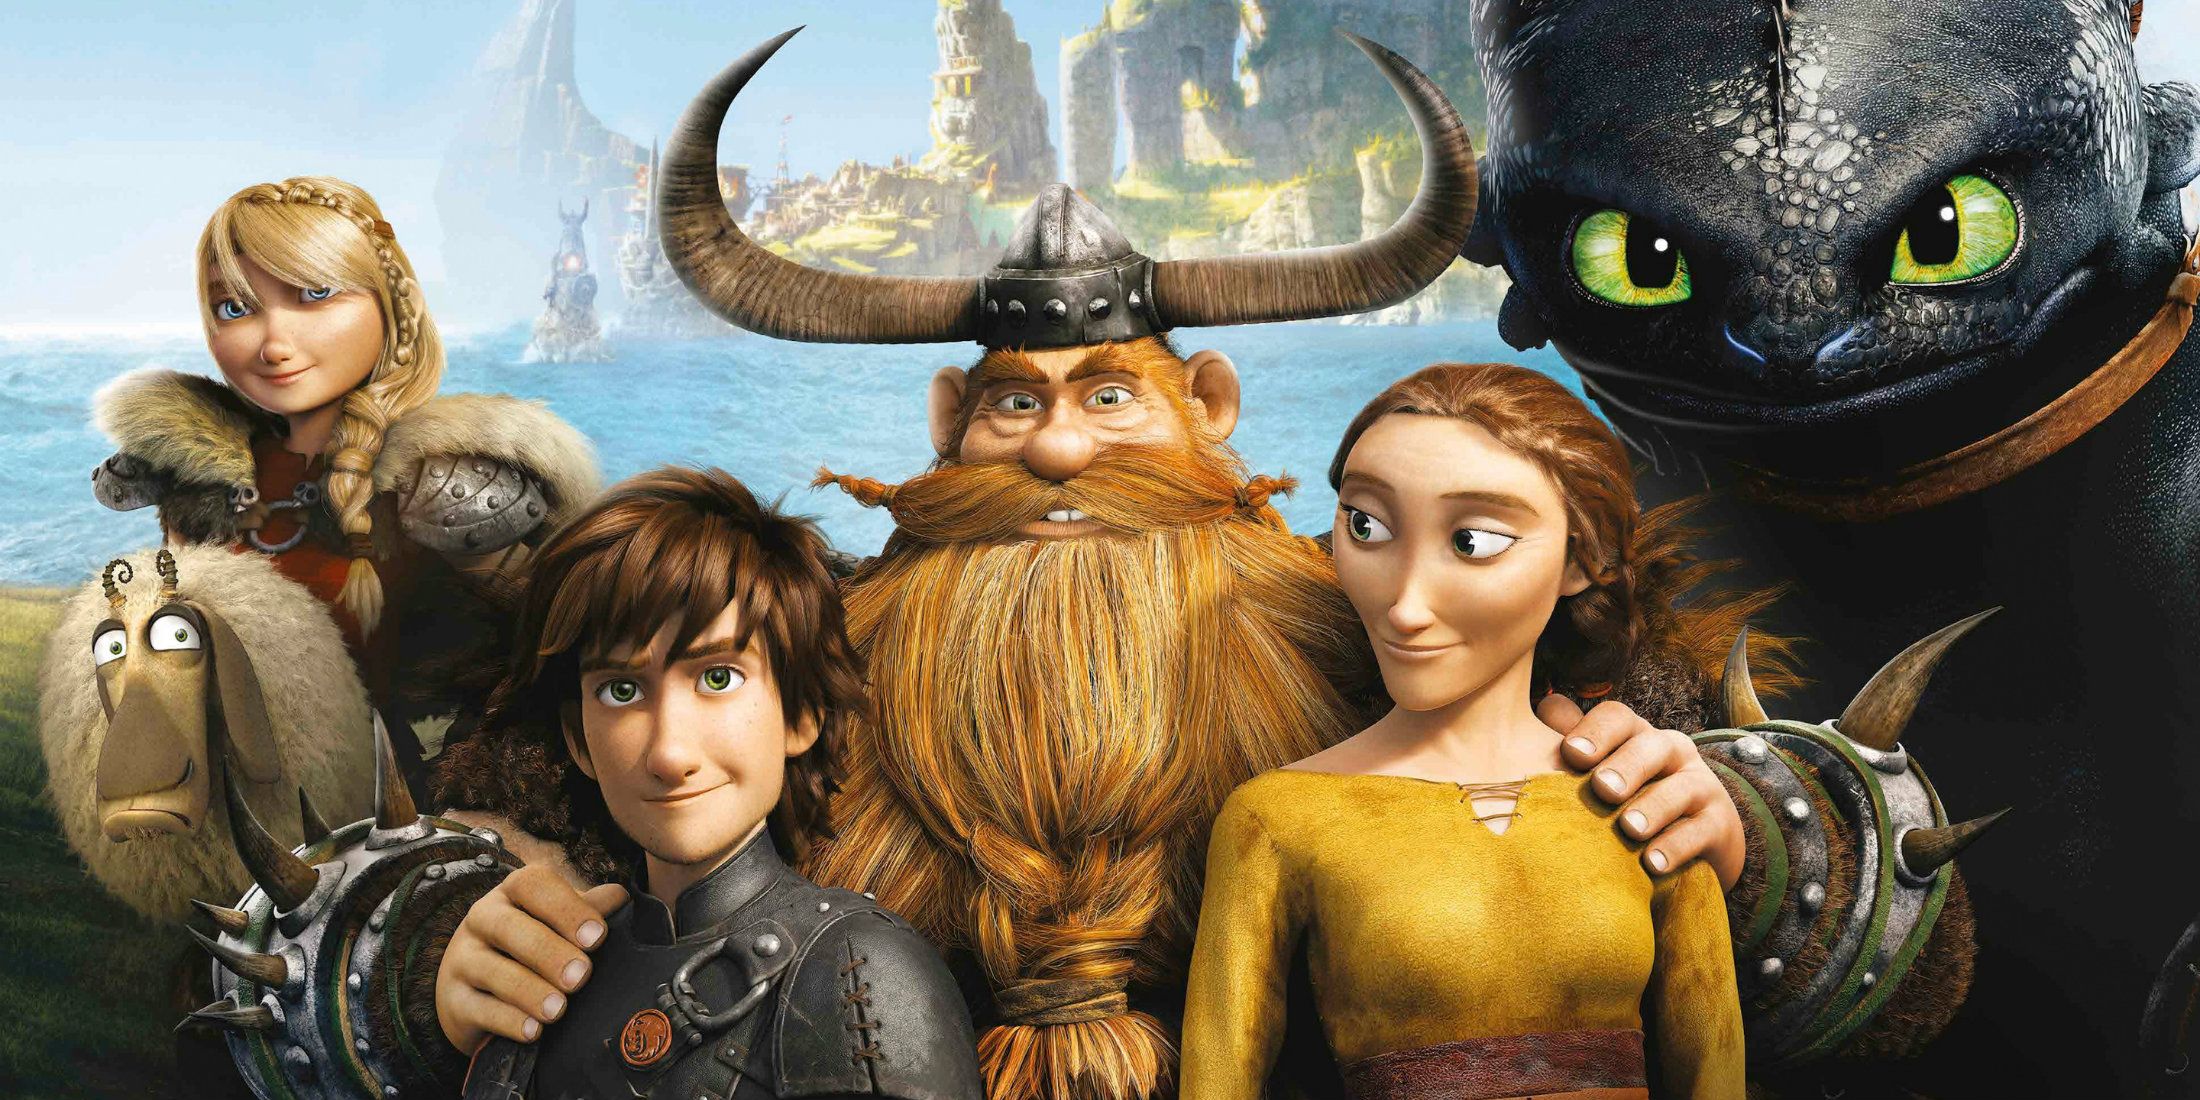 The main characters in How to Train Your Dragon 2, posing for a photo